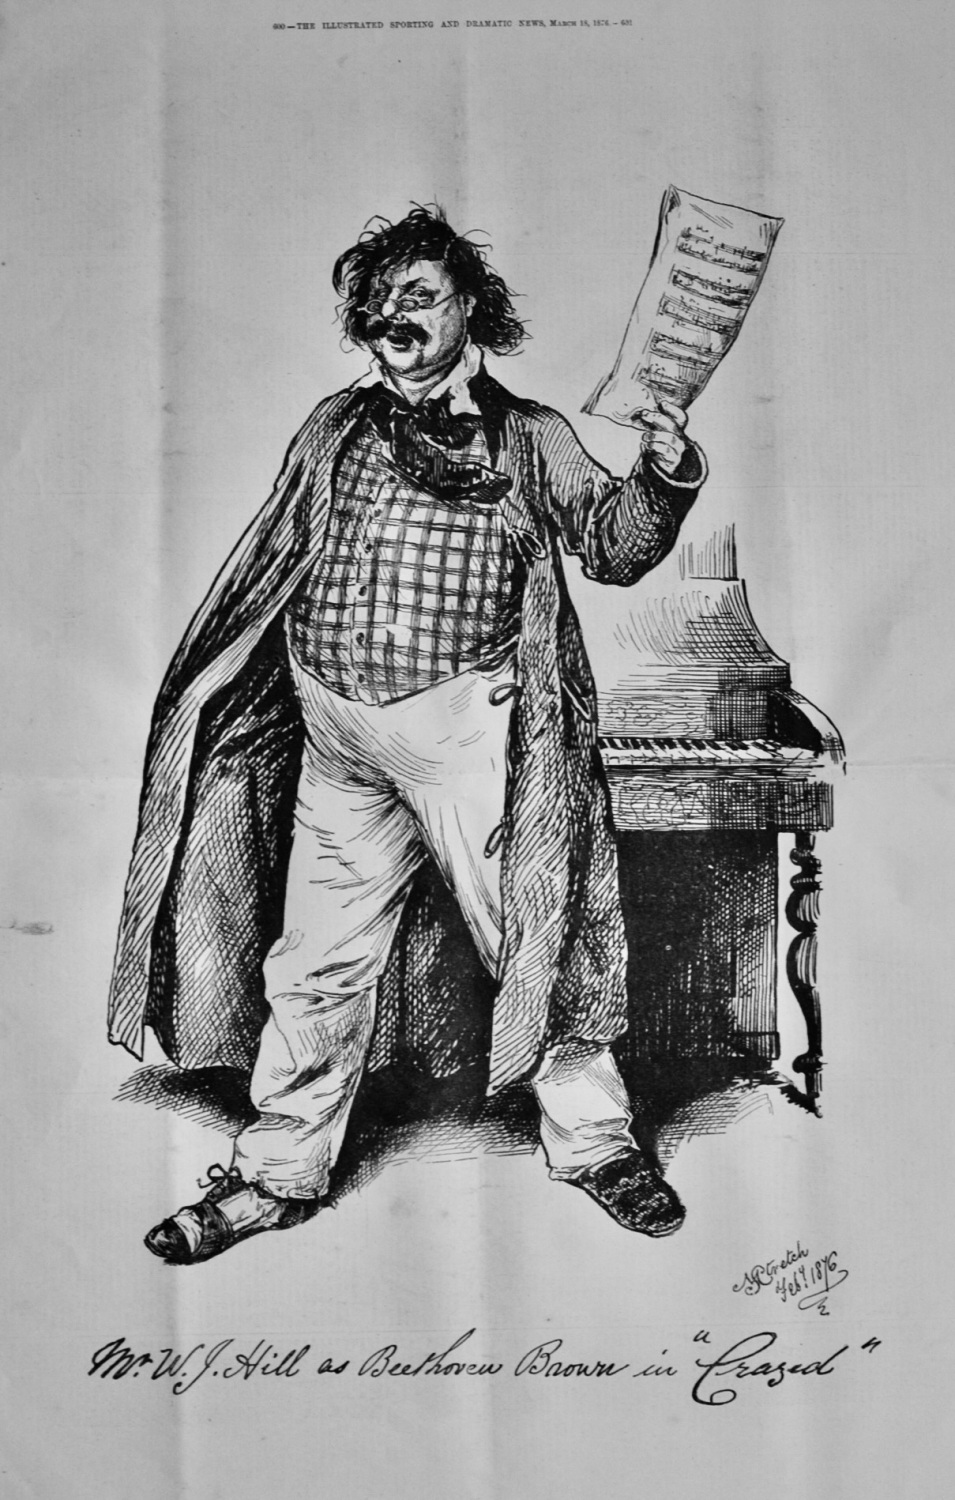 Mr. William J. Hill as Beethoven Brown in 